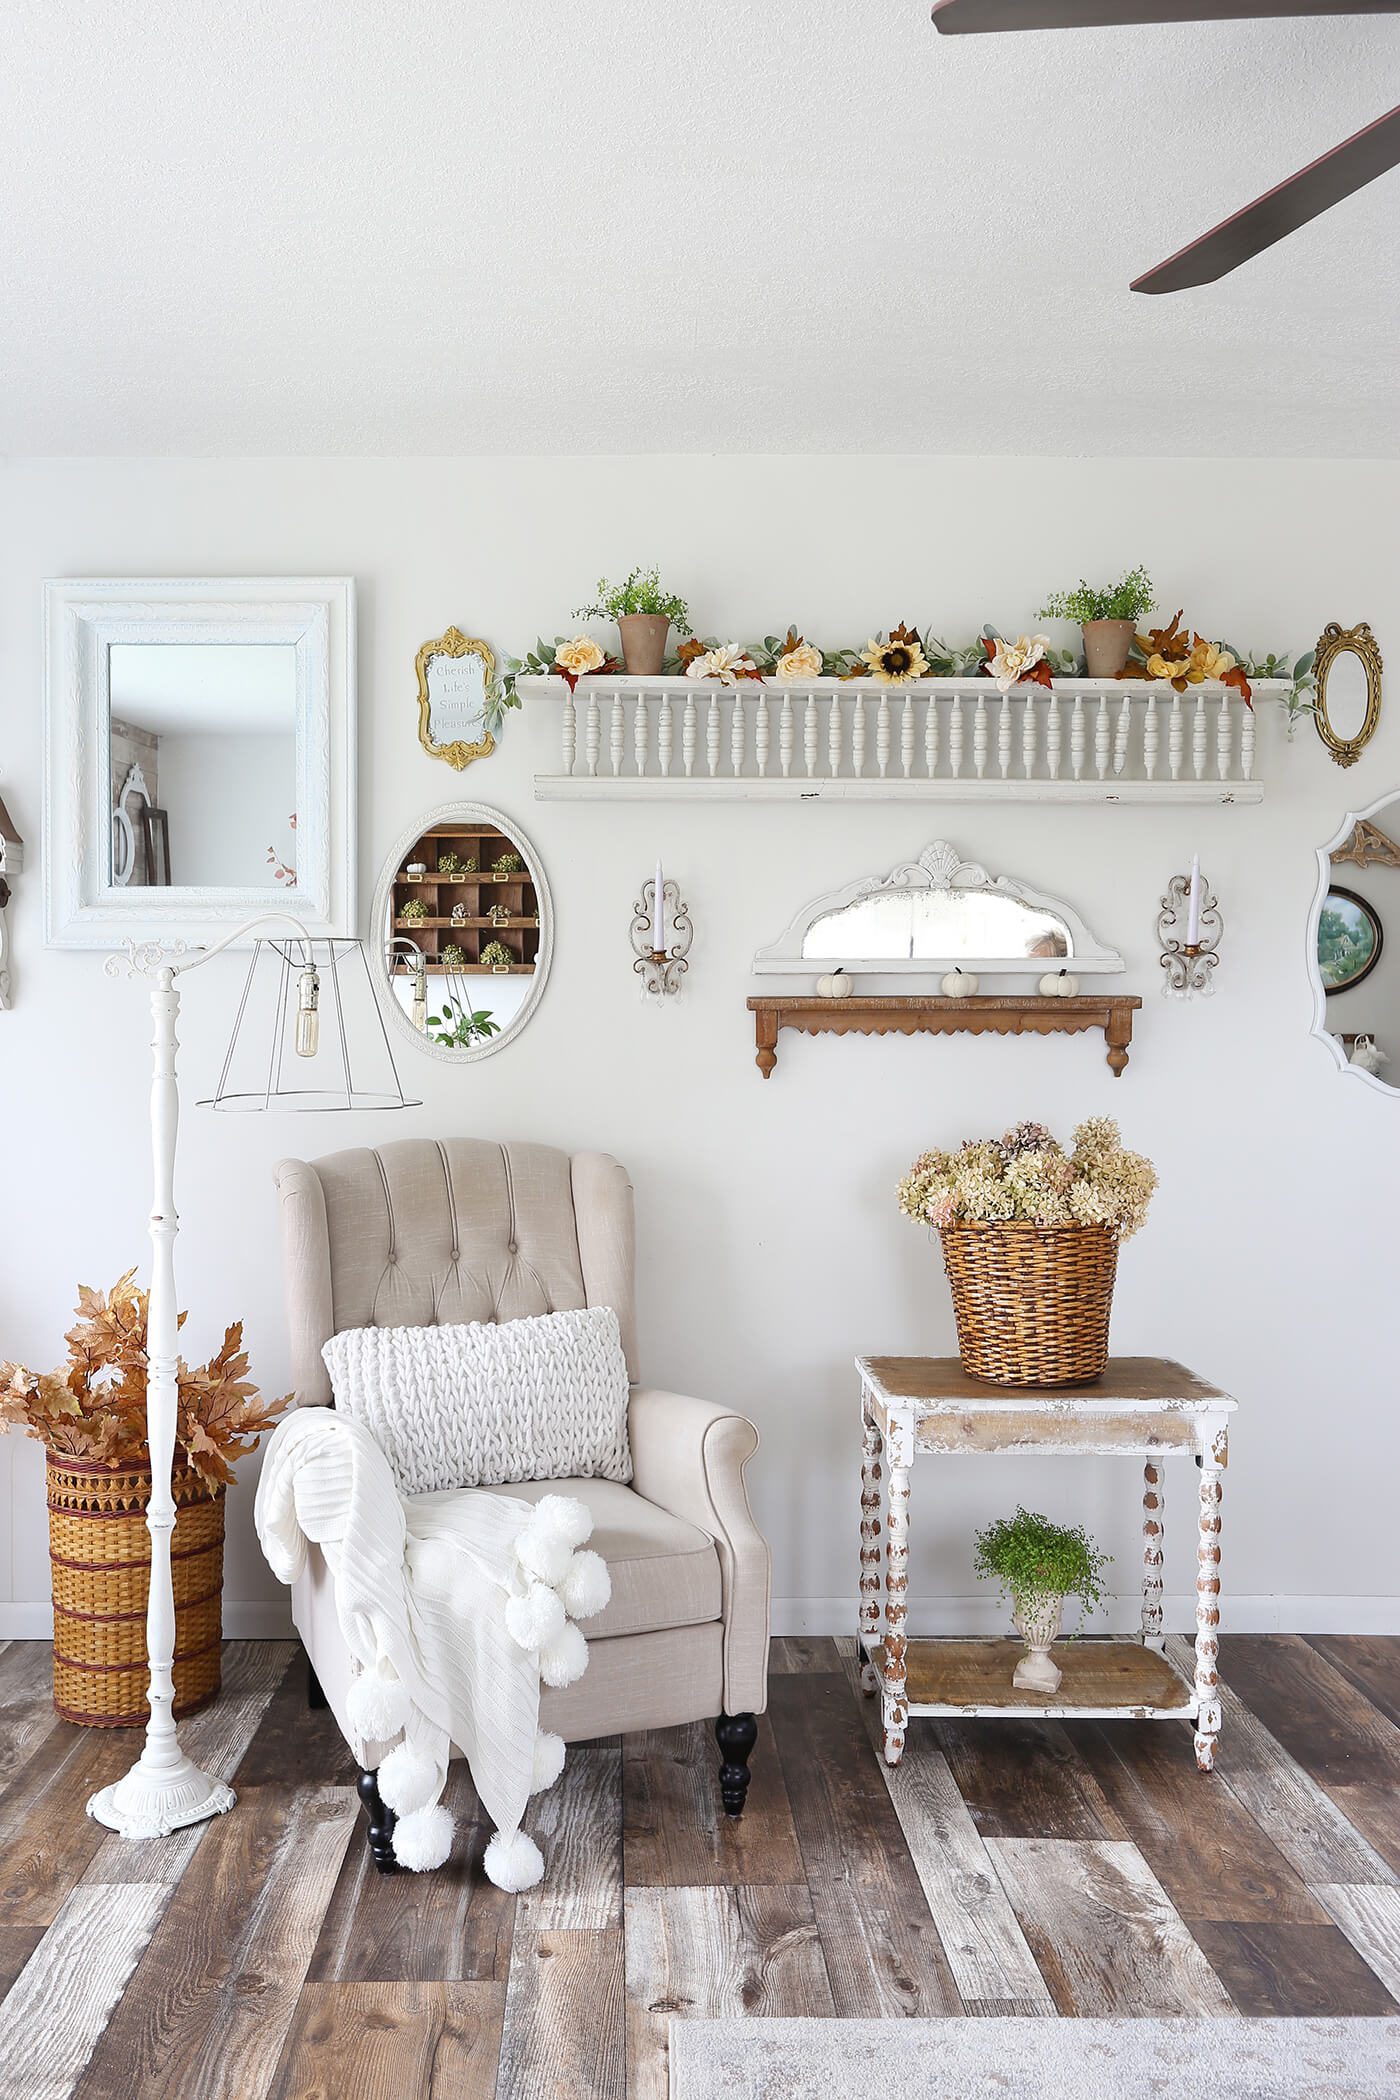 Sitting area with white chair, fall decor and dried hydrangeas for fall farmhouse style